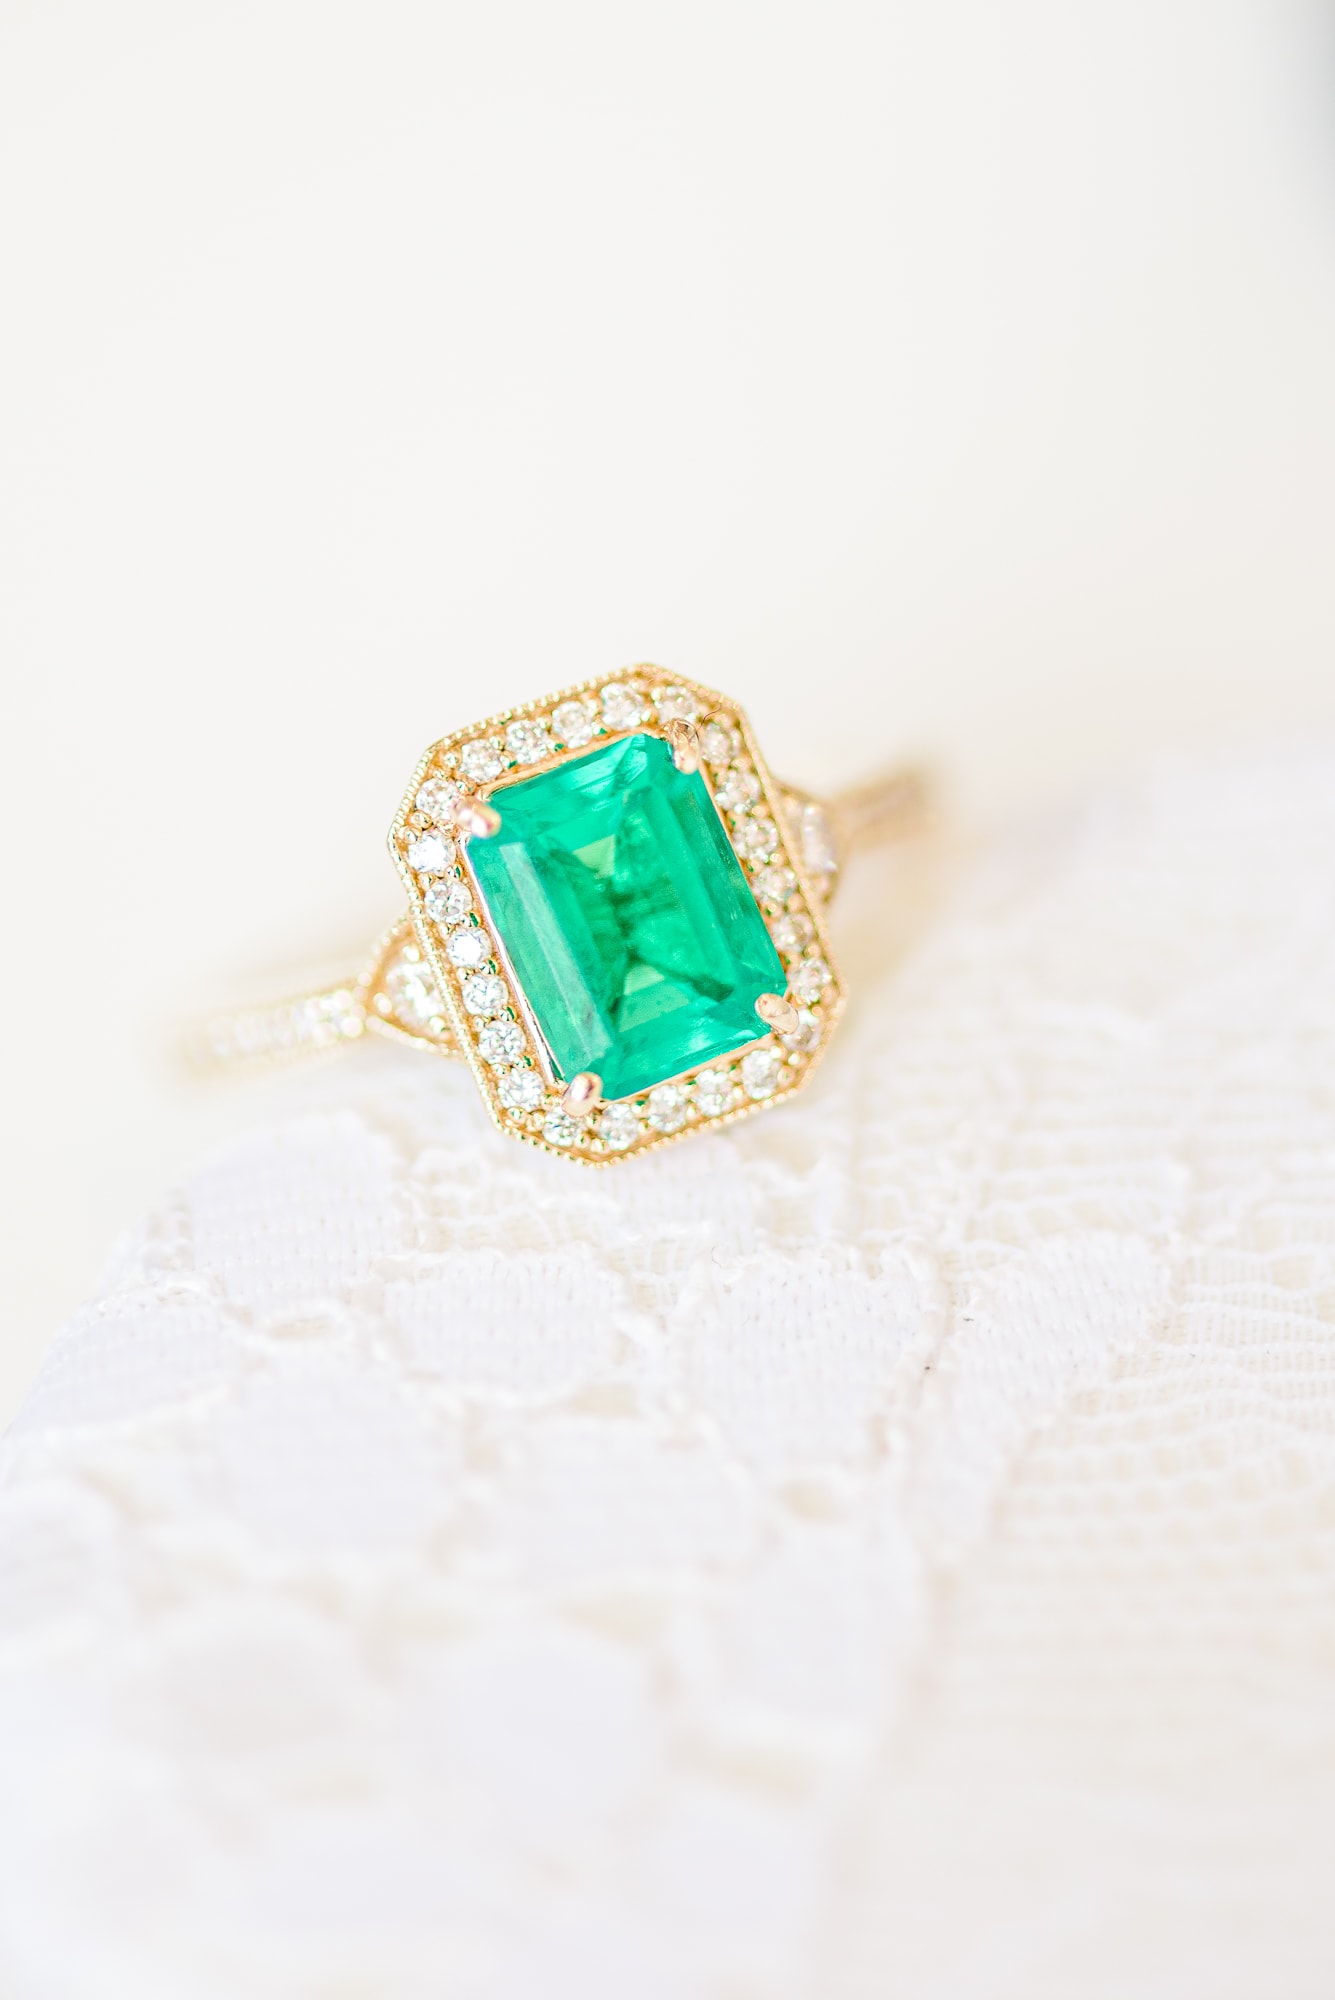 This wedding at the Distillery in Garner NC featured a bride with an emerald and gold engagement ring.